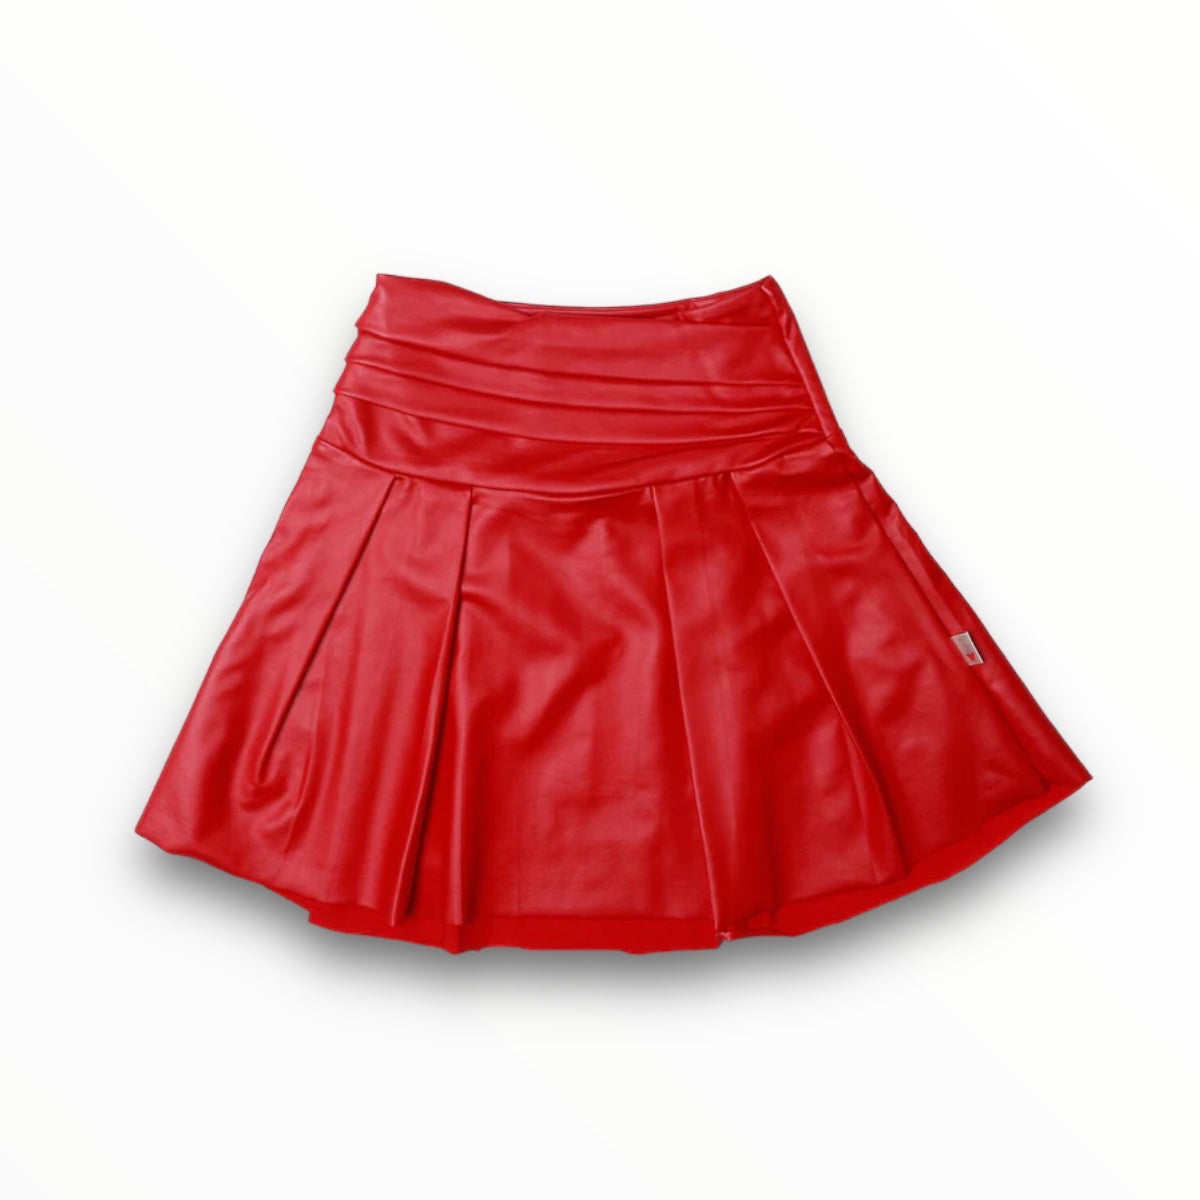 T2LOVE LAYERED WAIST SKIRT - RED PLEATHER